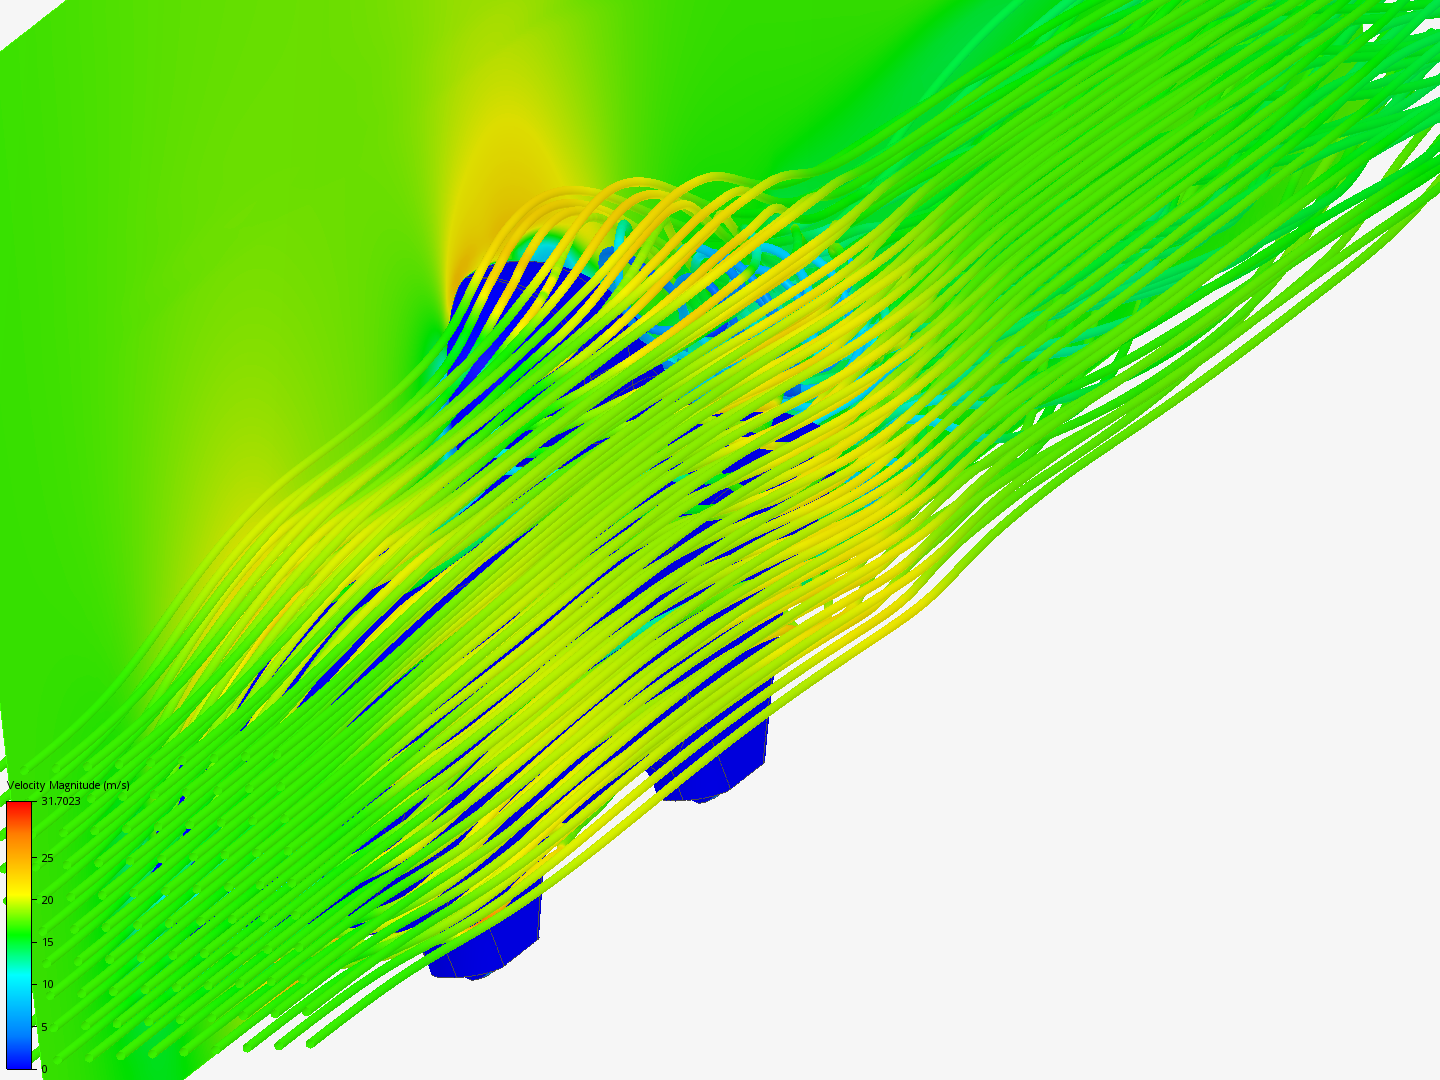 magpie_3_v1-6_cfd_2 image